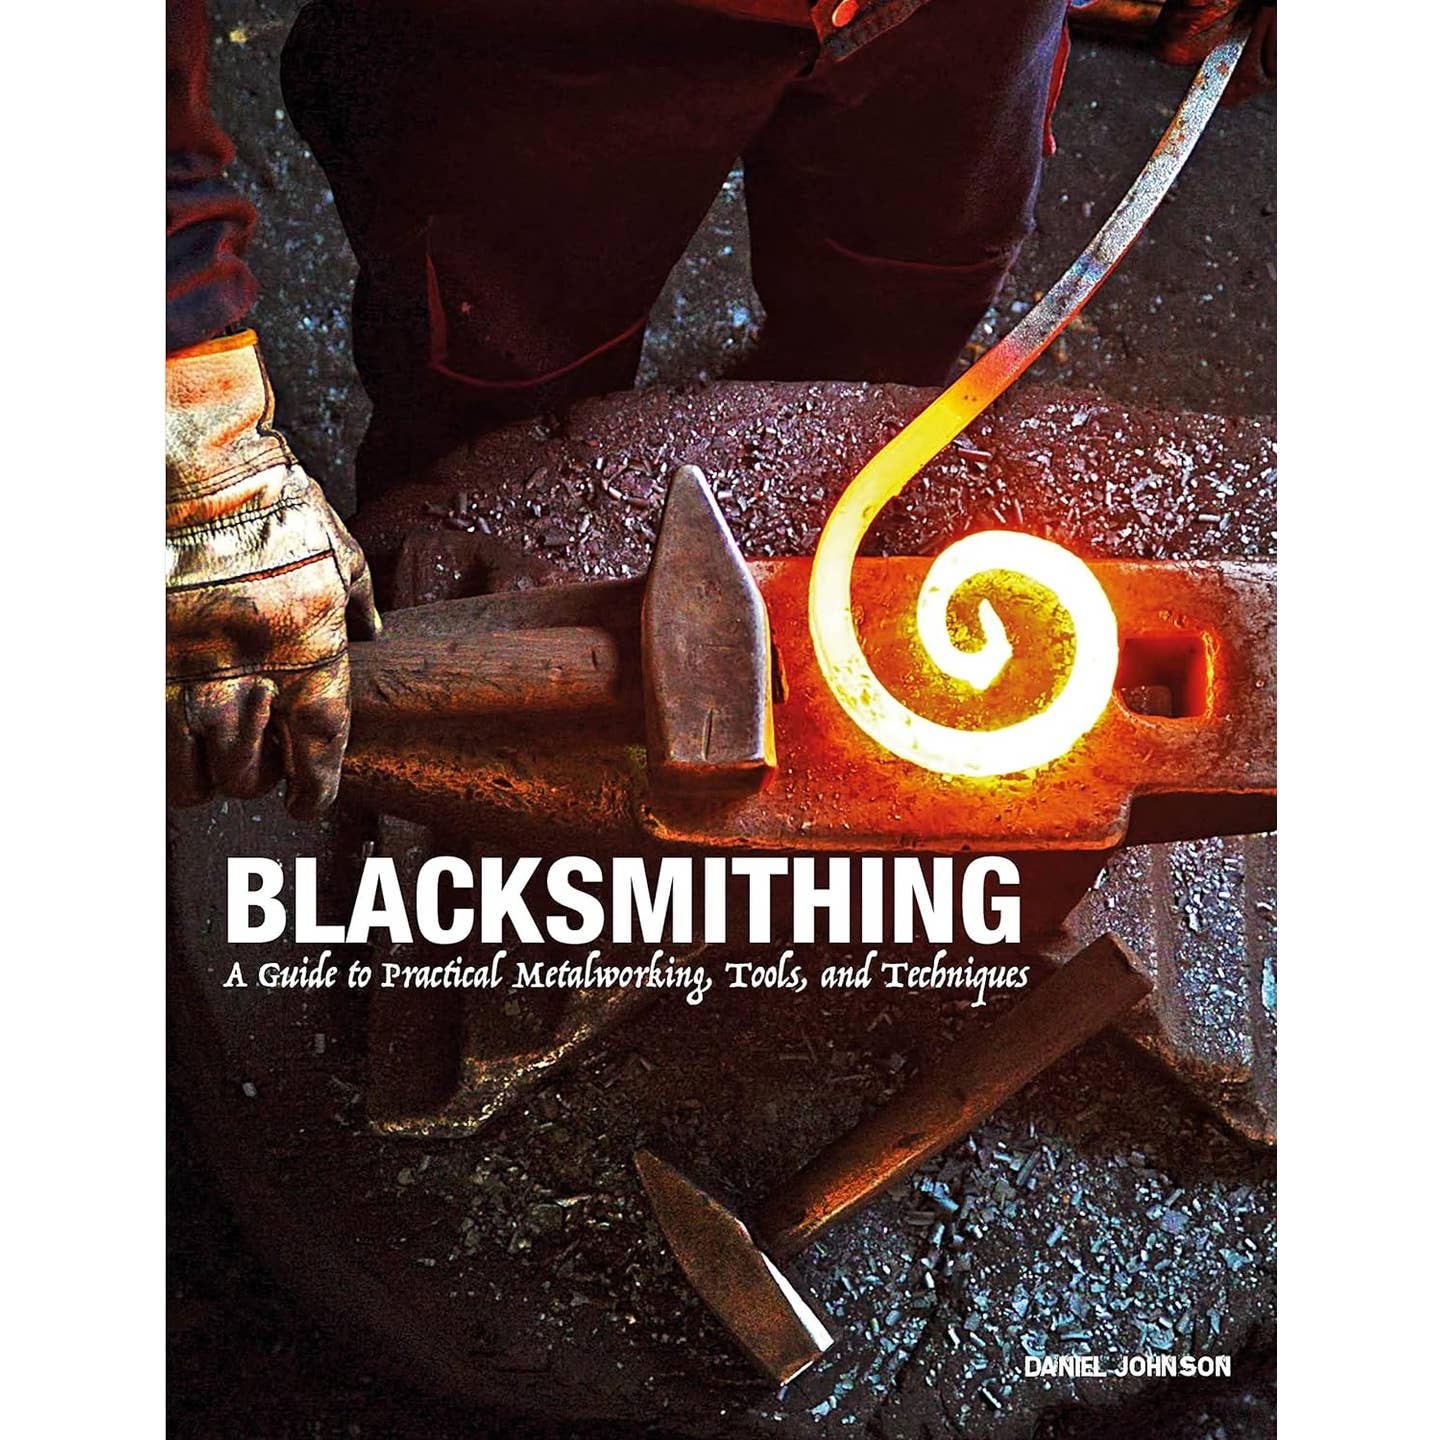 Blacksmithing: A Guide to Practical Metalworking & Tools